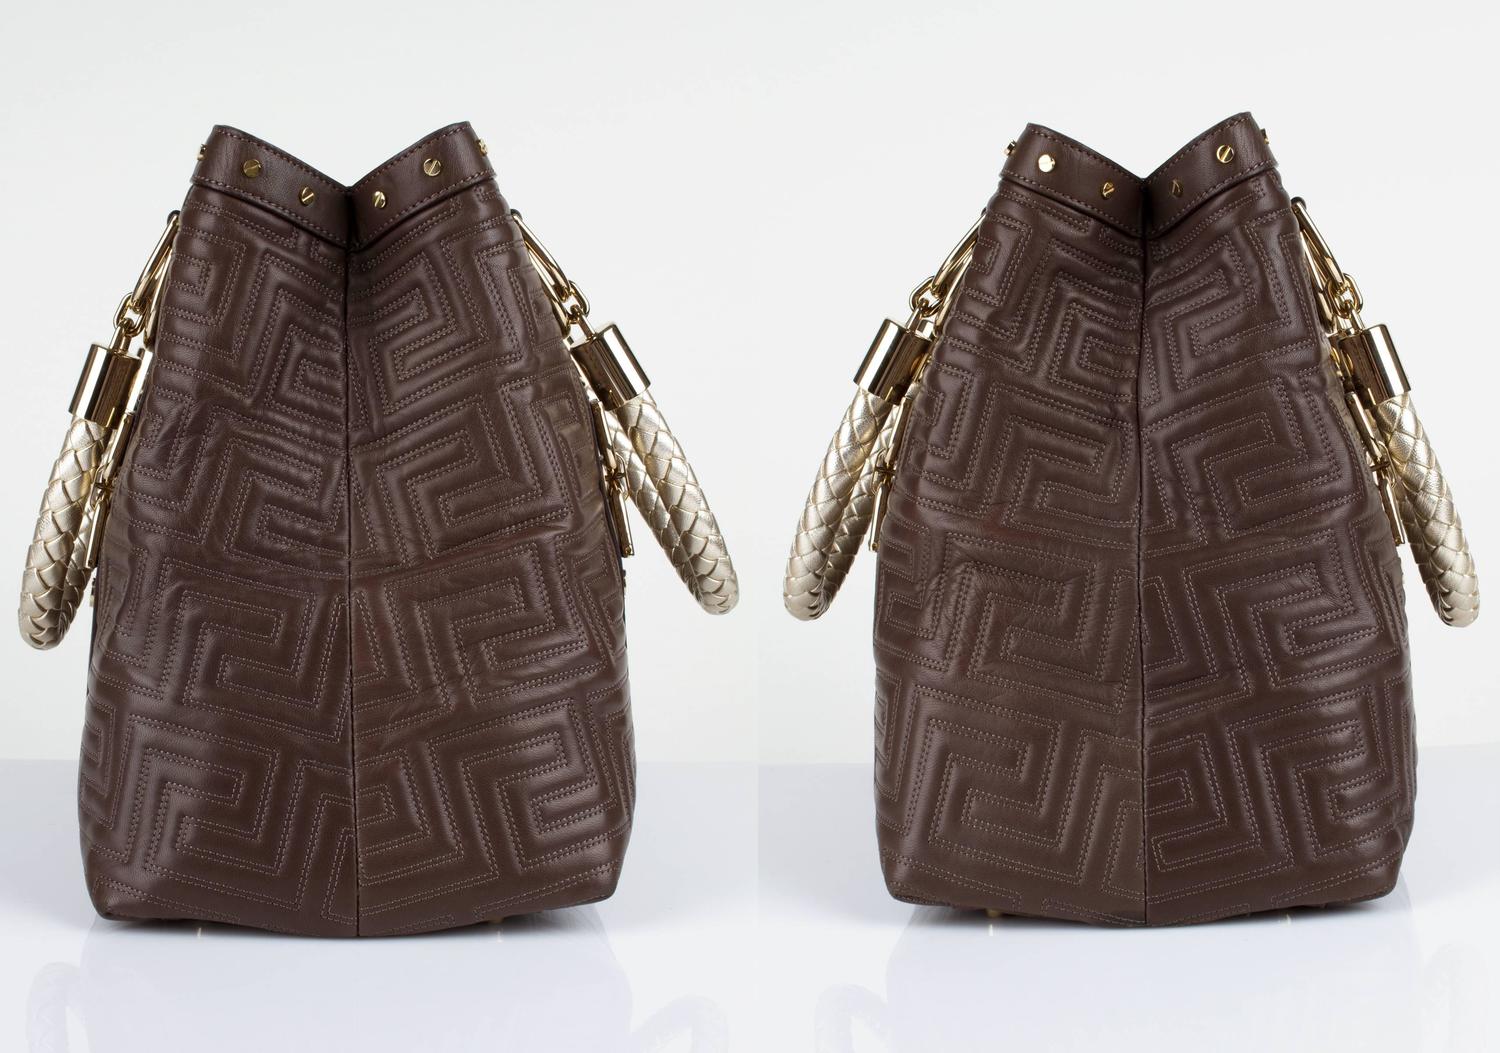 GIANNI VERSACE Couture Brown Quilted Leather Gold Hardware Handbag Purse NWT For Sale at 1stdibs